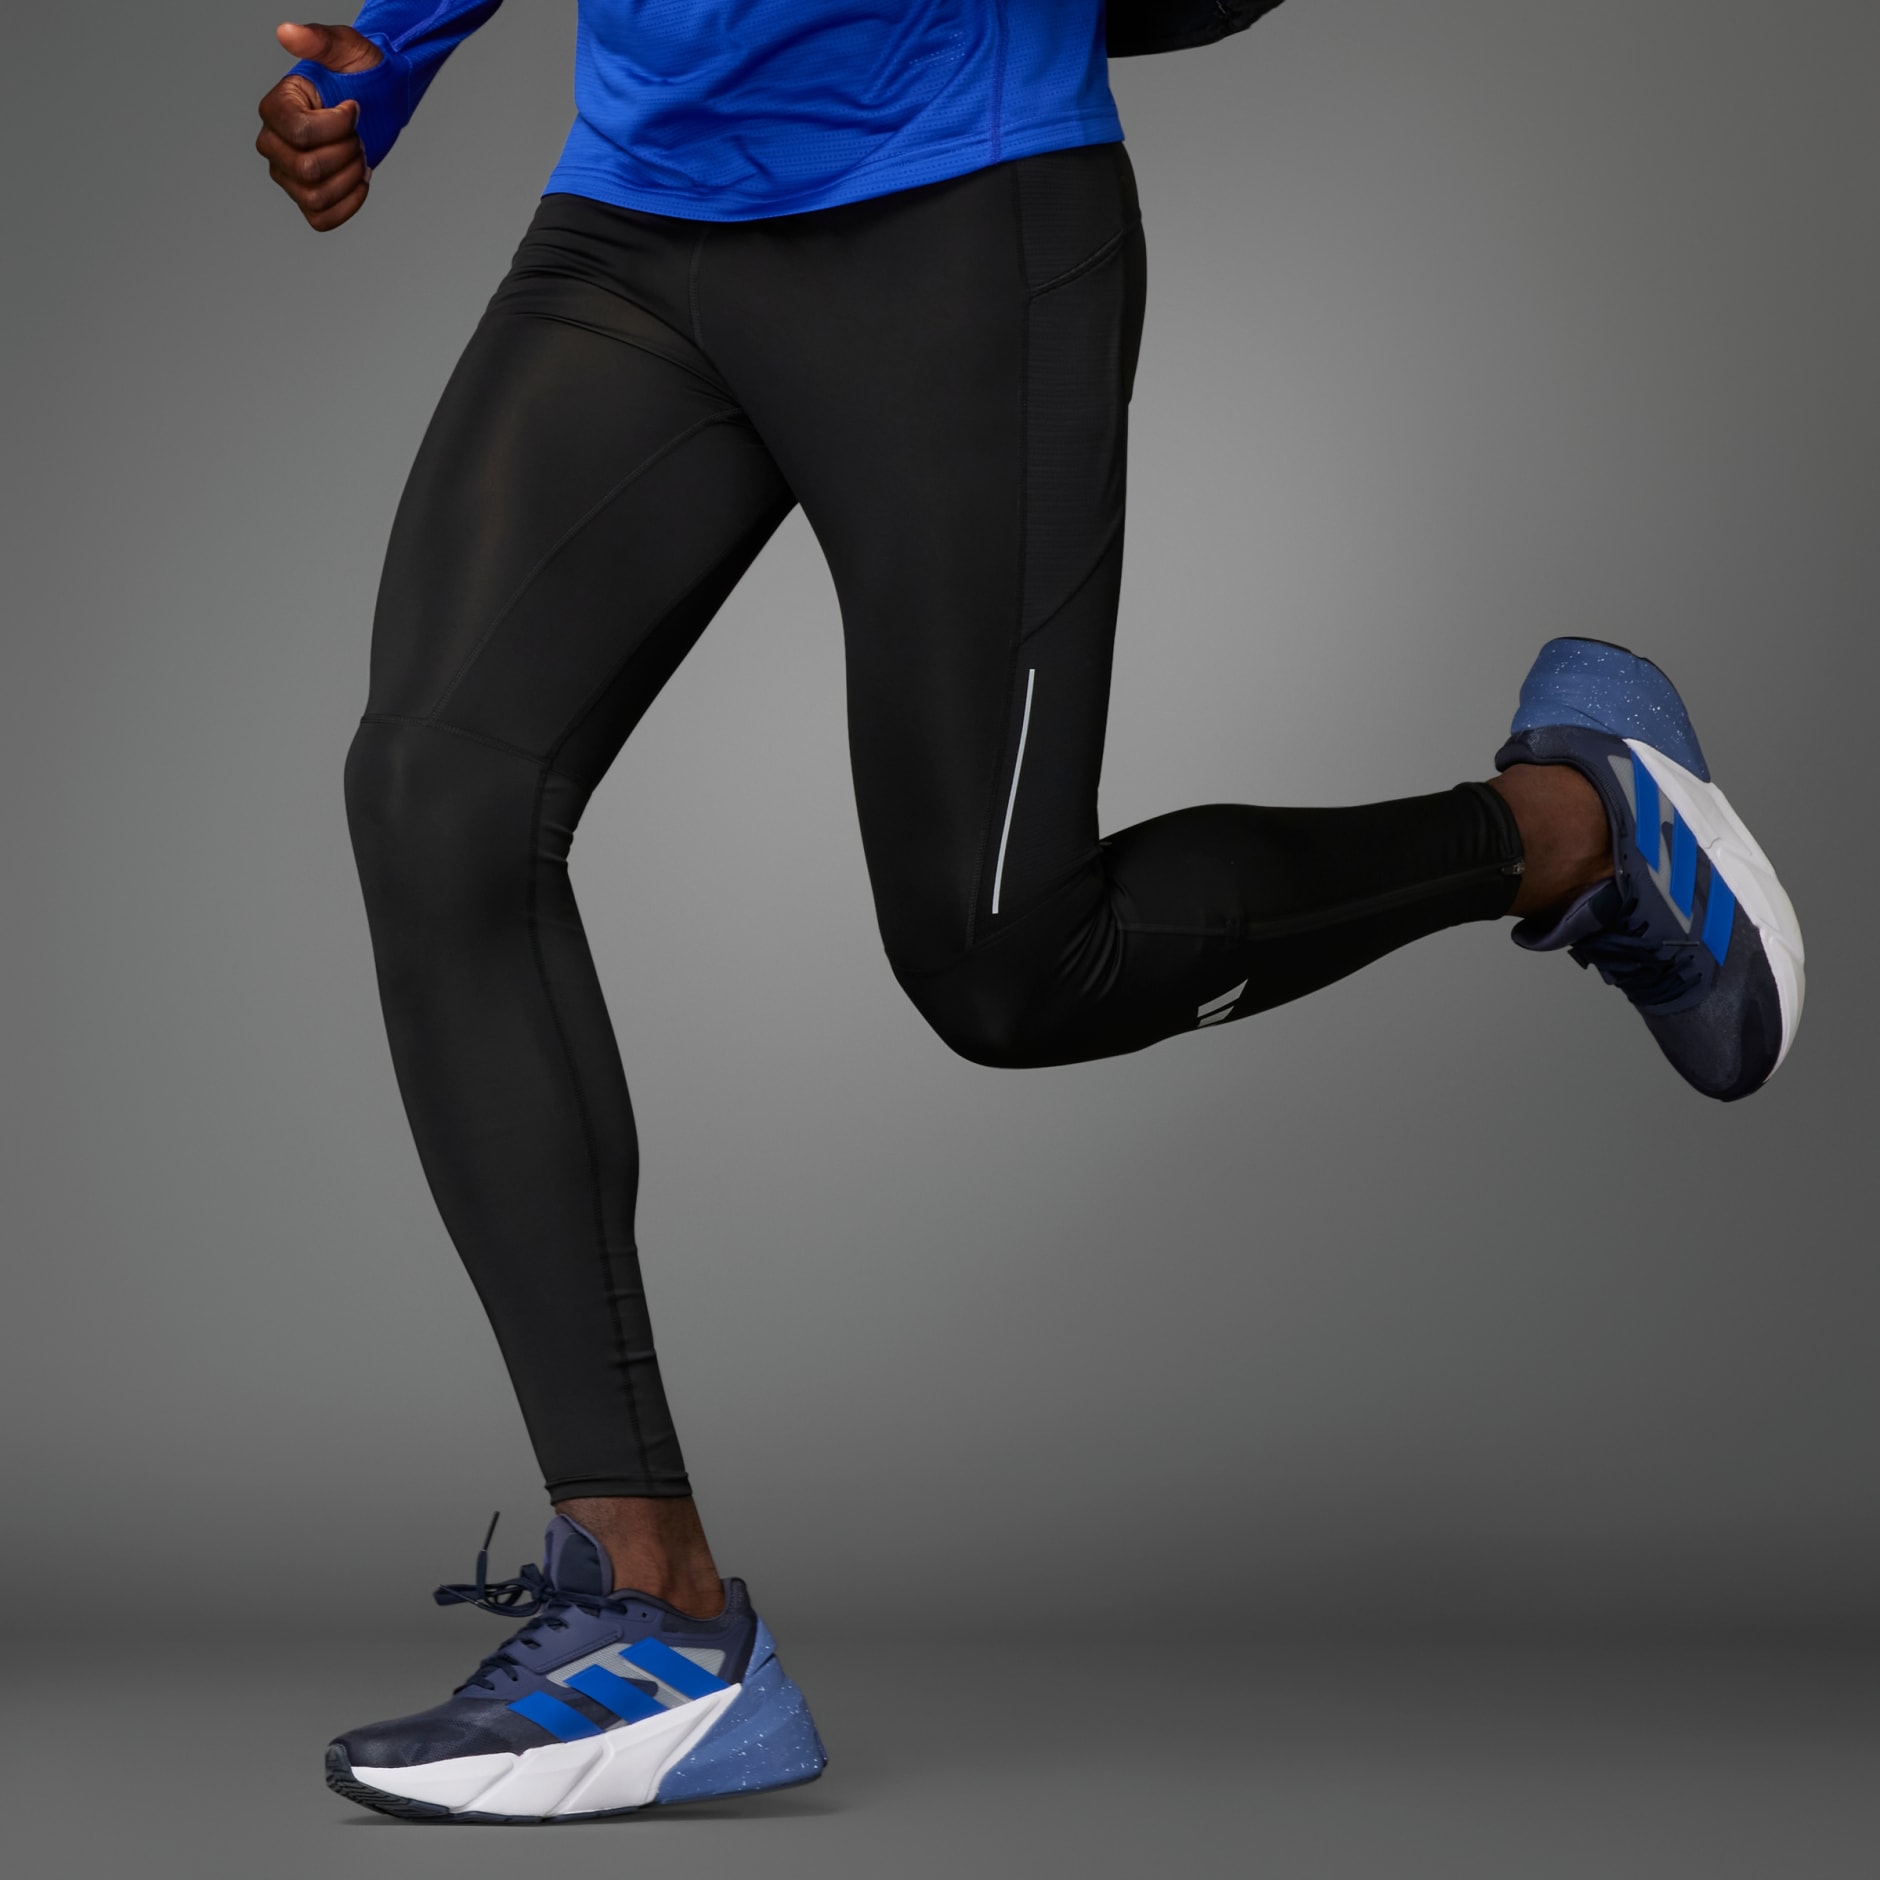 New Balance Accelerate Tight - Running Clothing | Nencini Sport